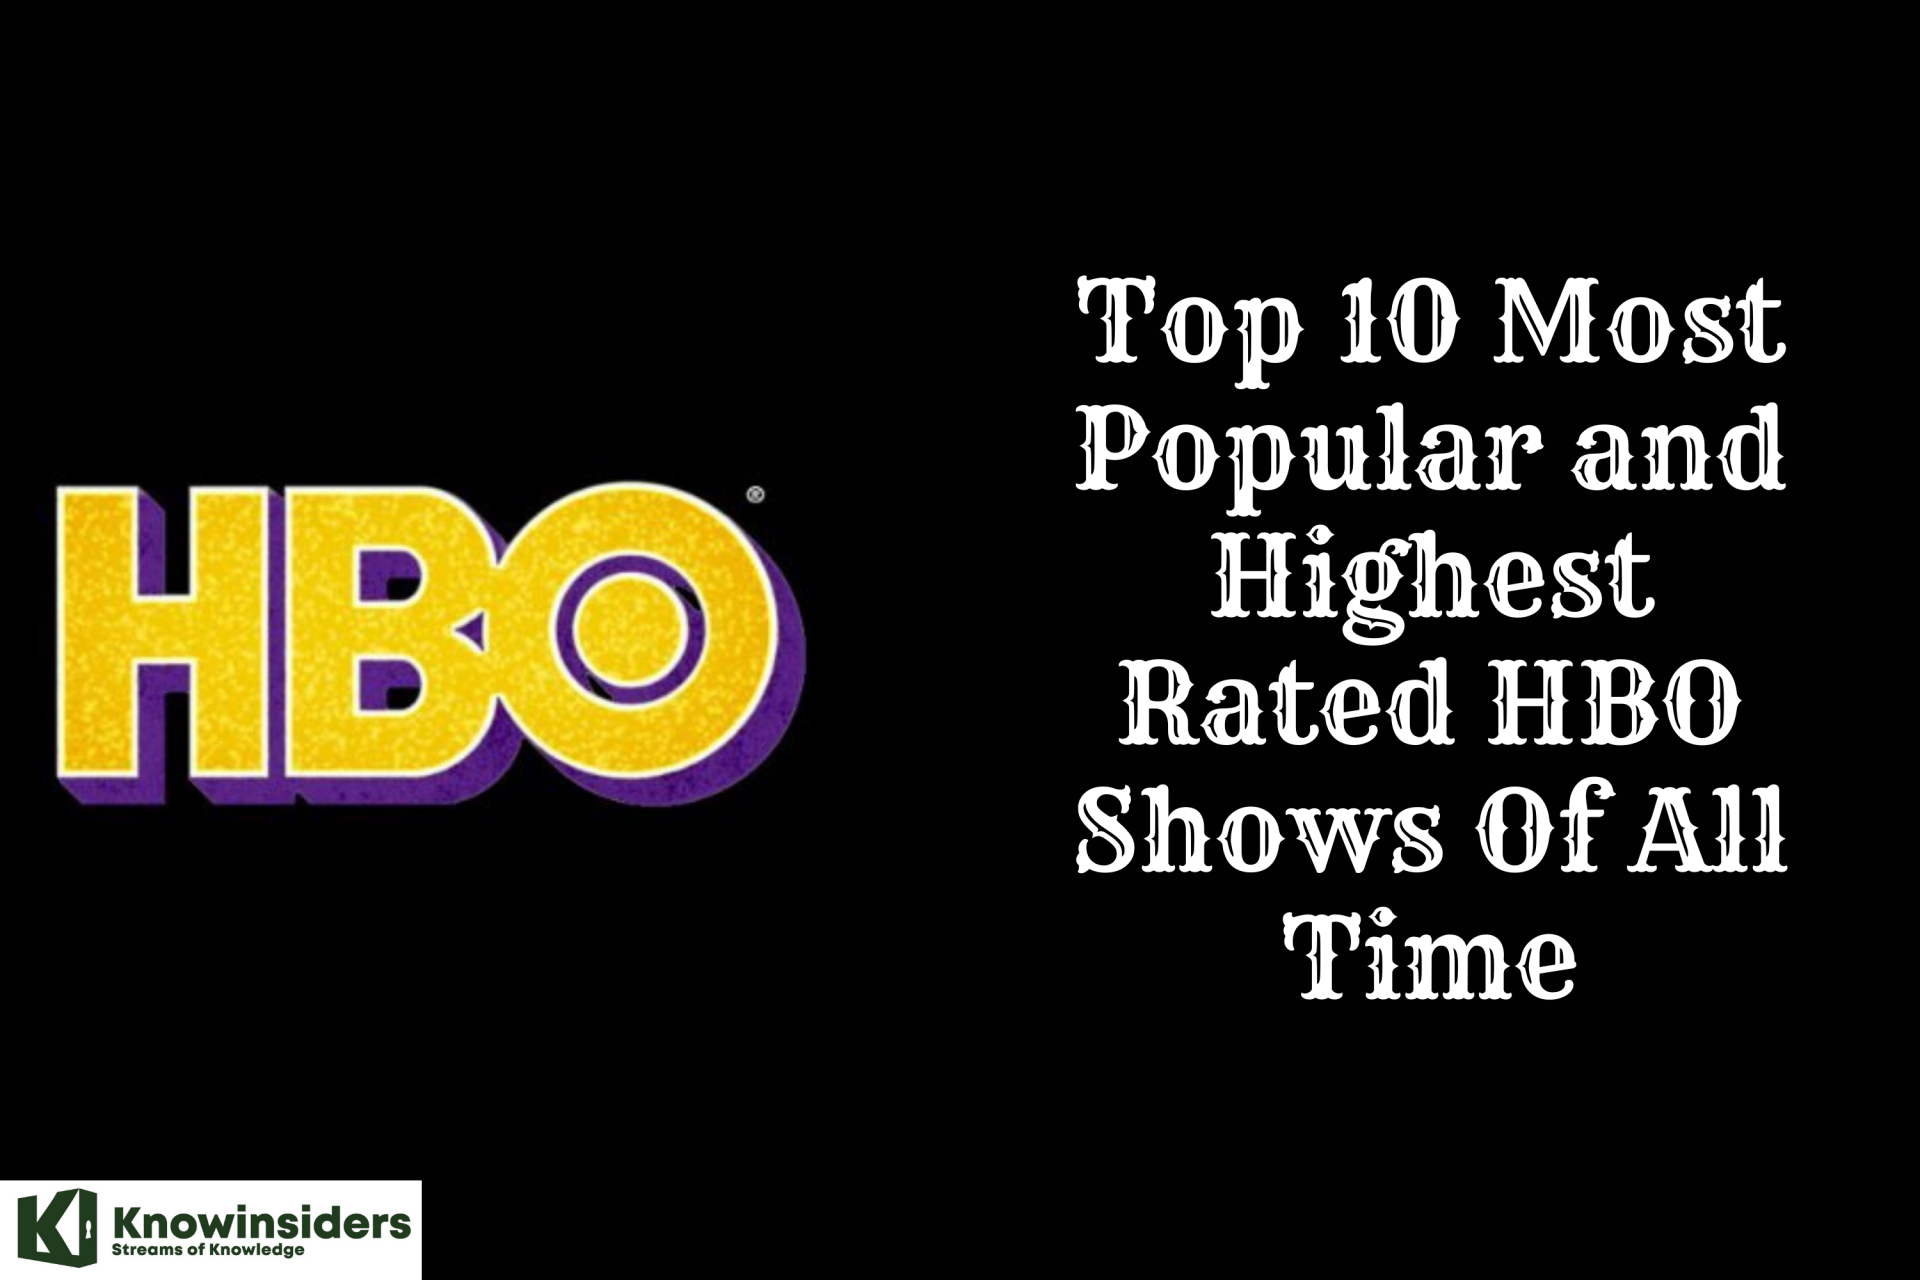 Top 10 Most Popular and Highest Rated HBO Shows Of All Time